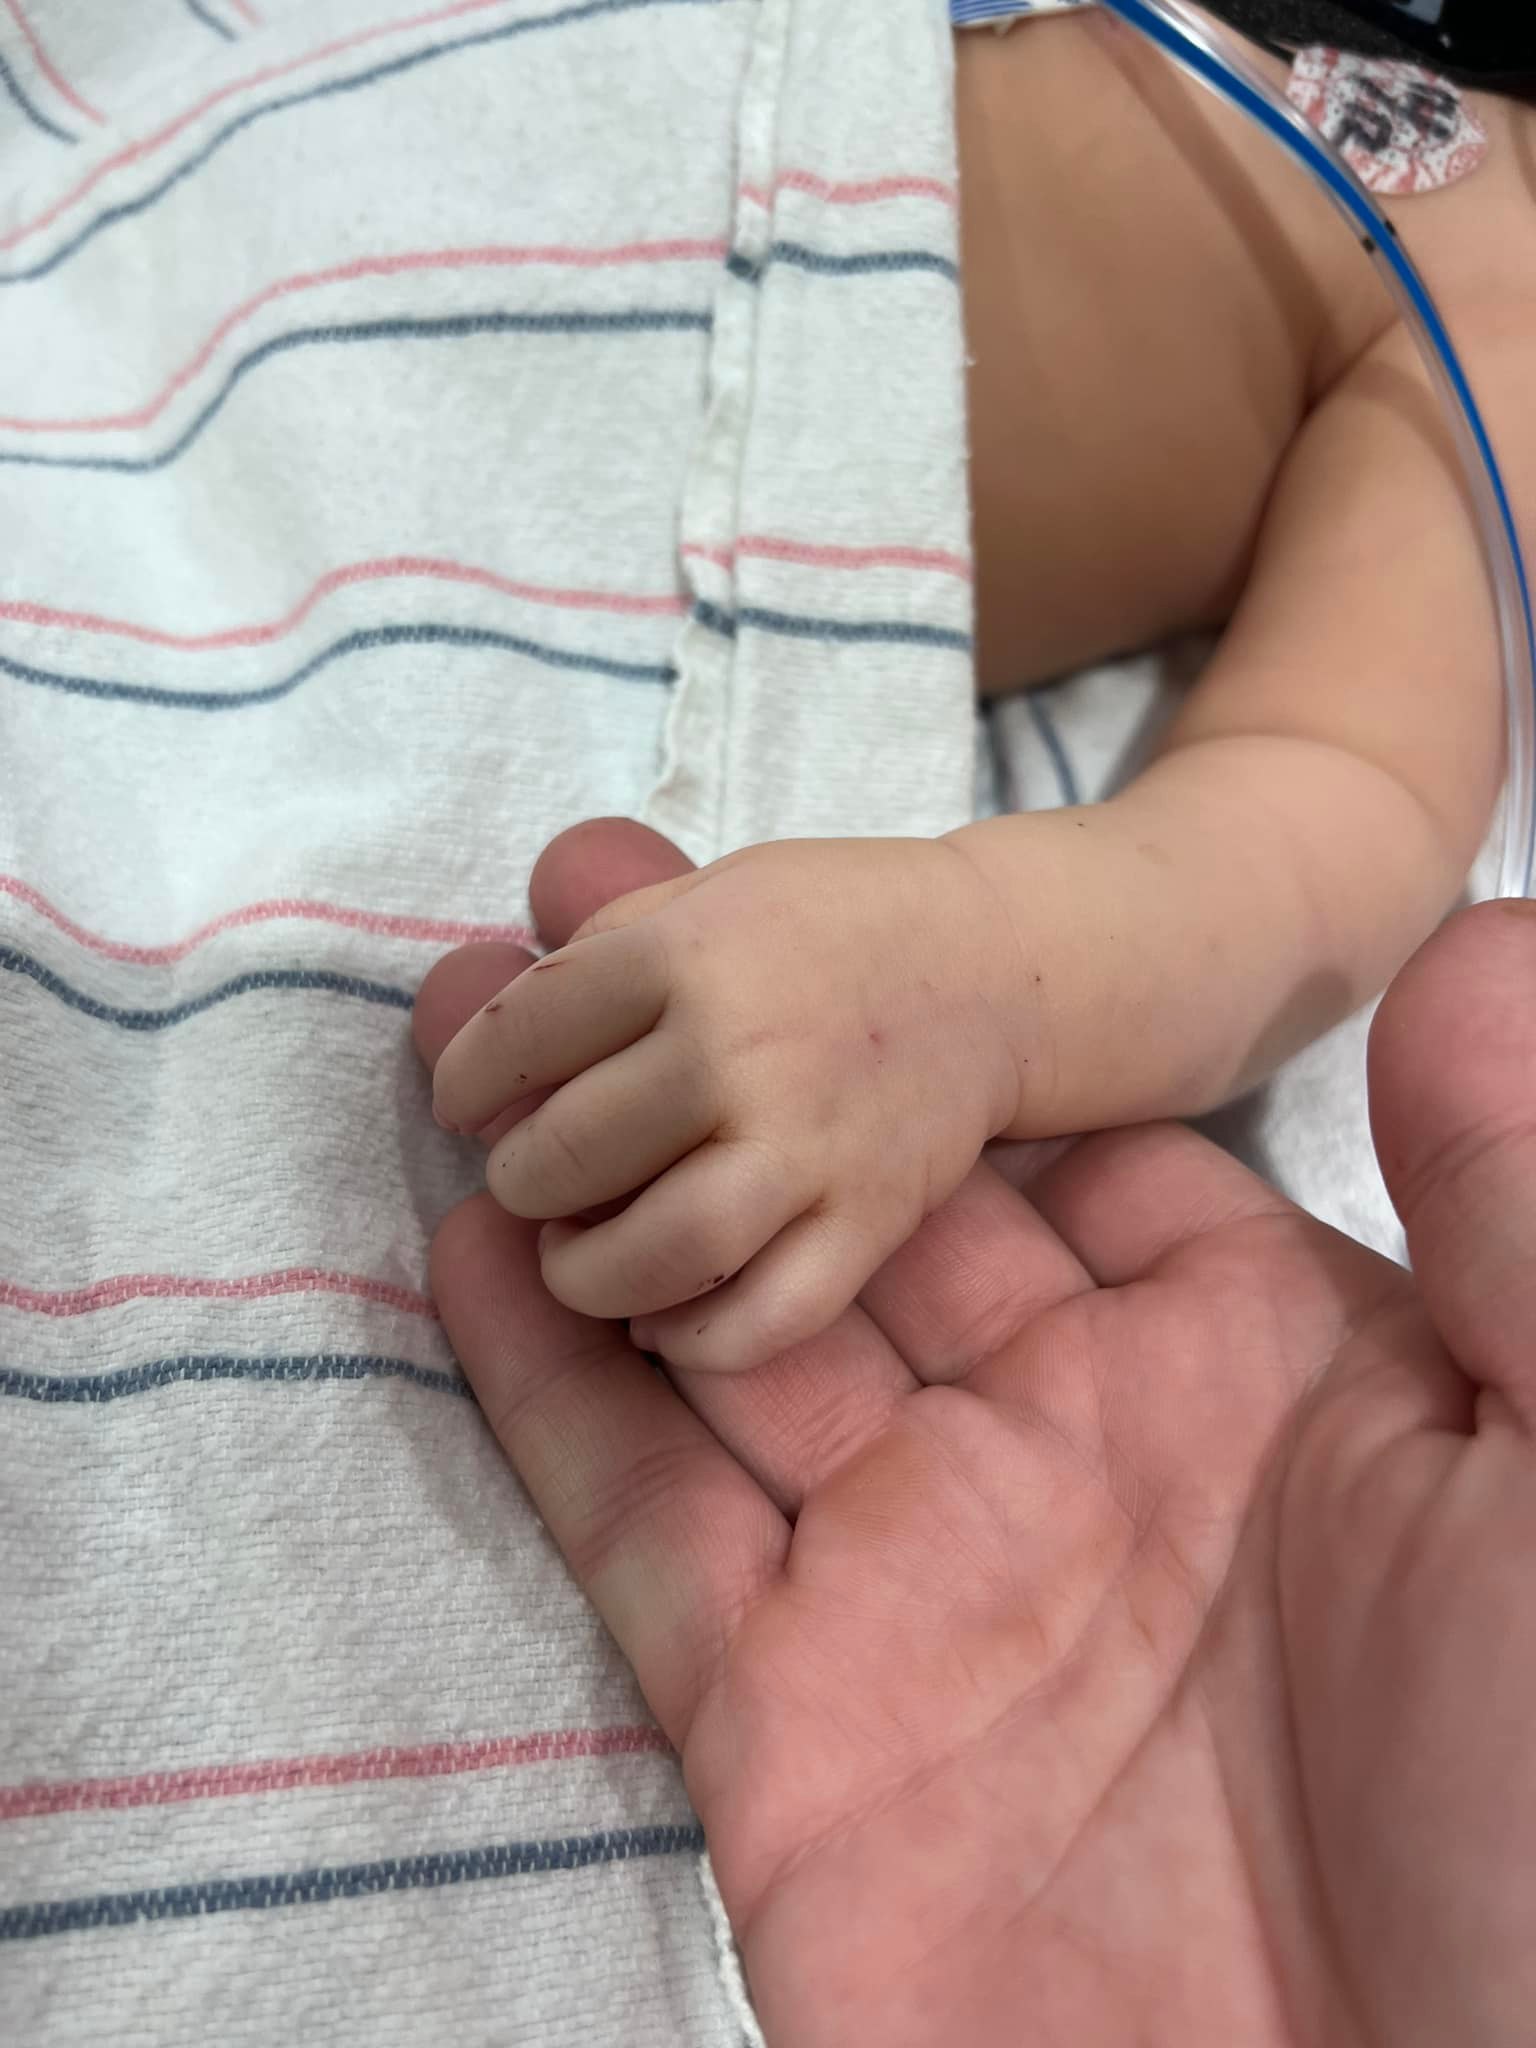 Oaklynn's hand rests in one of her parent's hands as she passes away. Jackie Koon wrote, "At least I know who will be watching over you up there for me. My dad. God this doesn't seem real." Image: Jackie Koon / Facebook